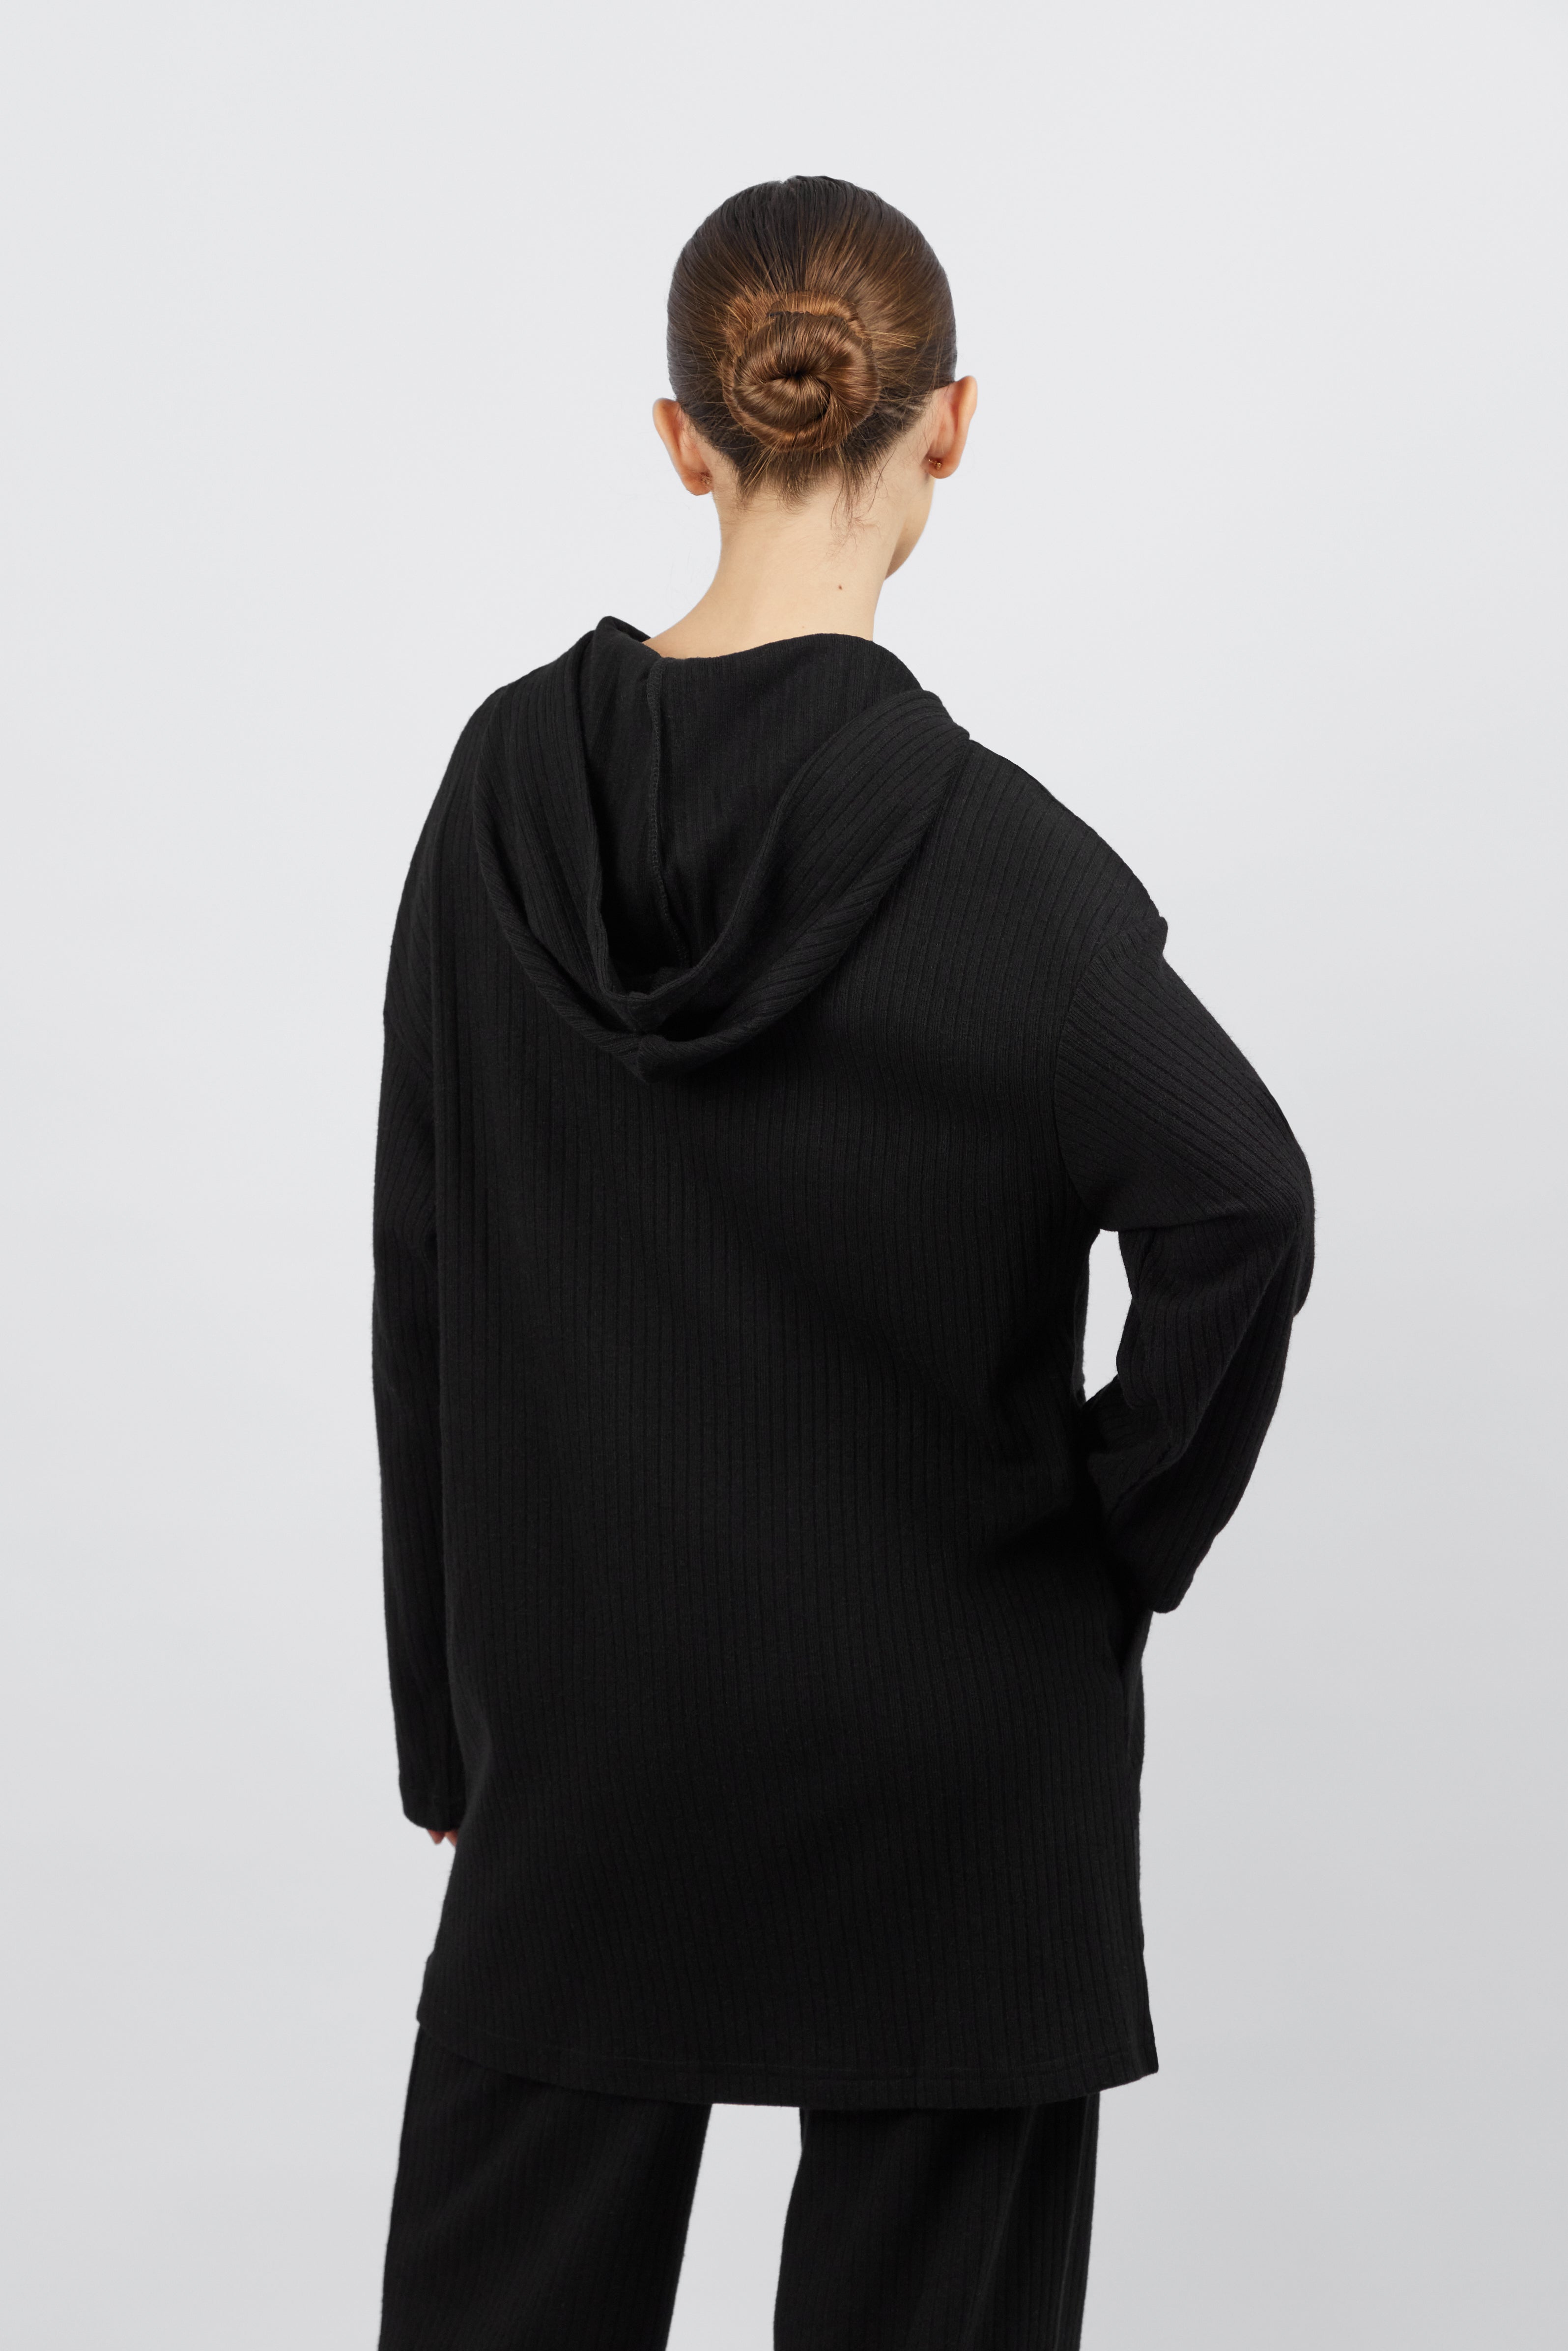 US - Knit Relaxed Fit Hoodie - Black